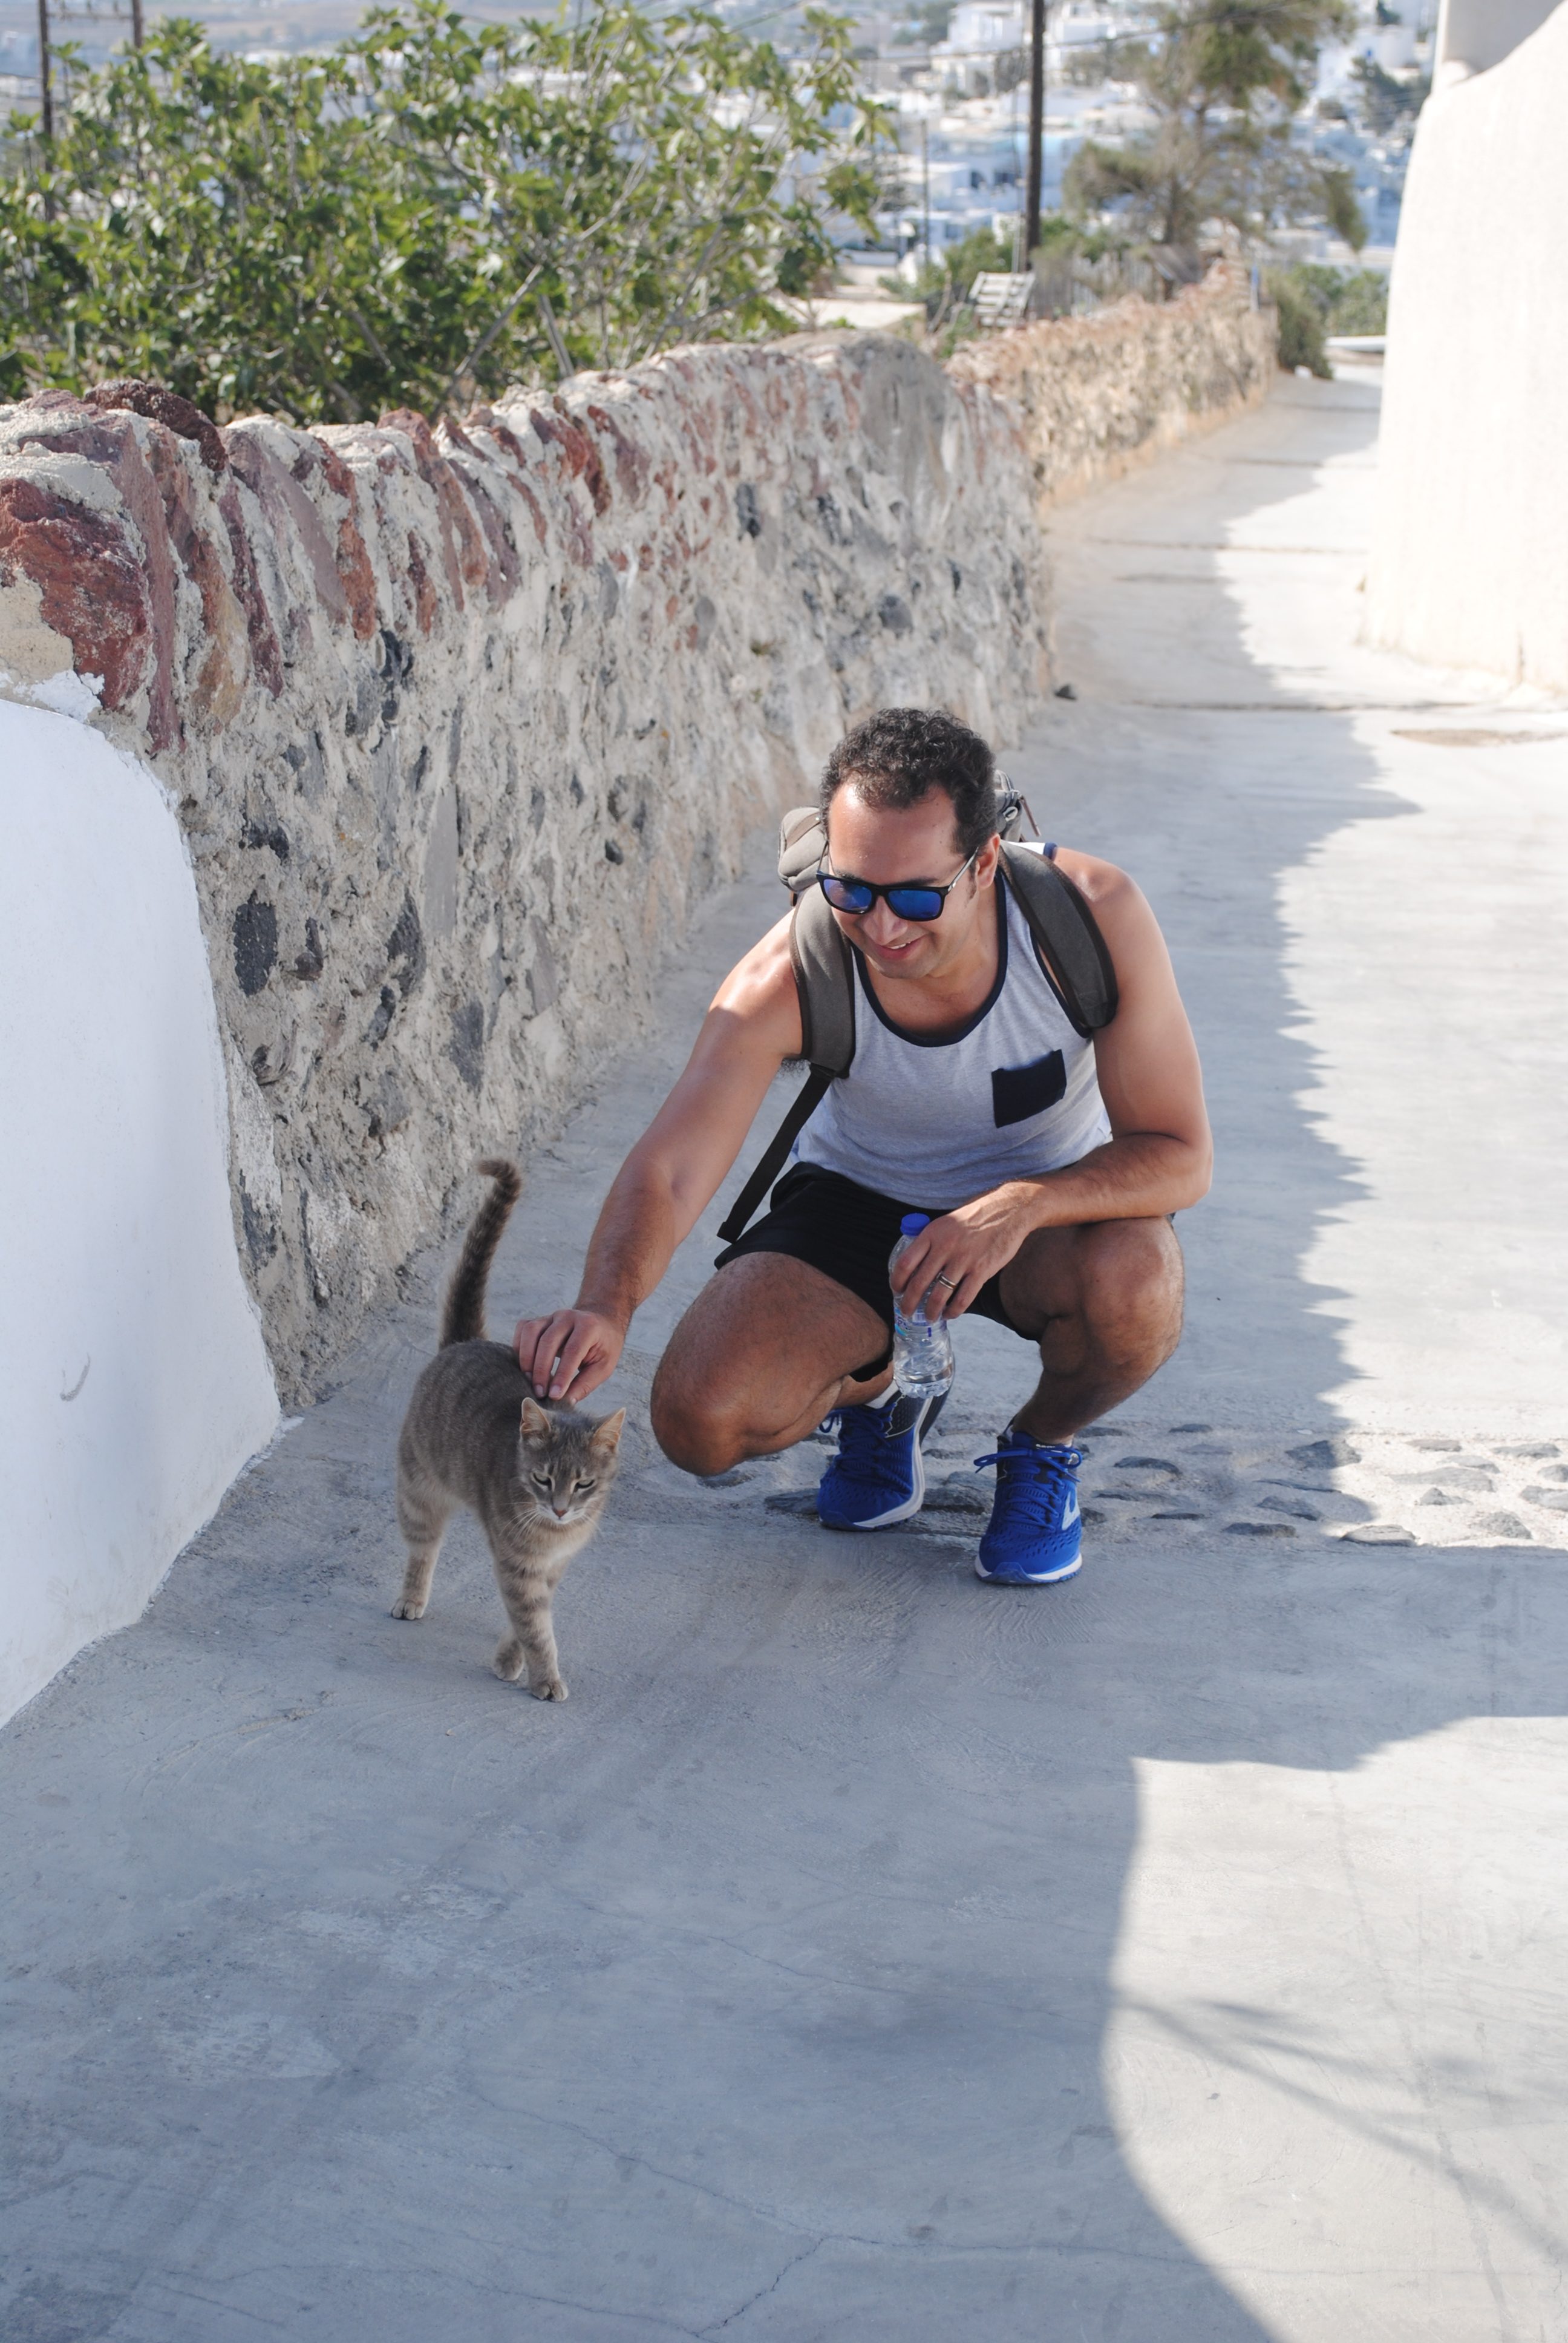 Making friends with stray cats in Santorini